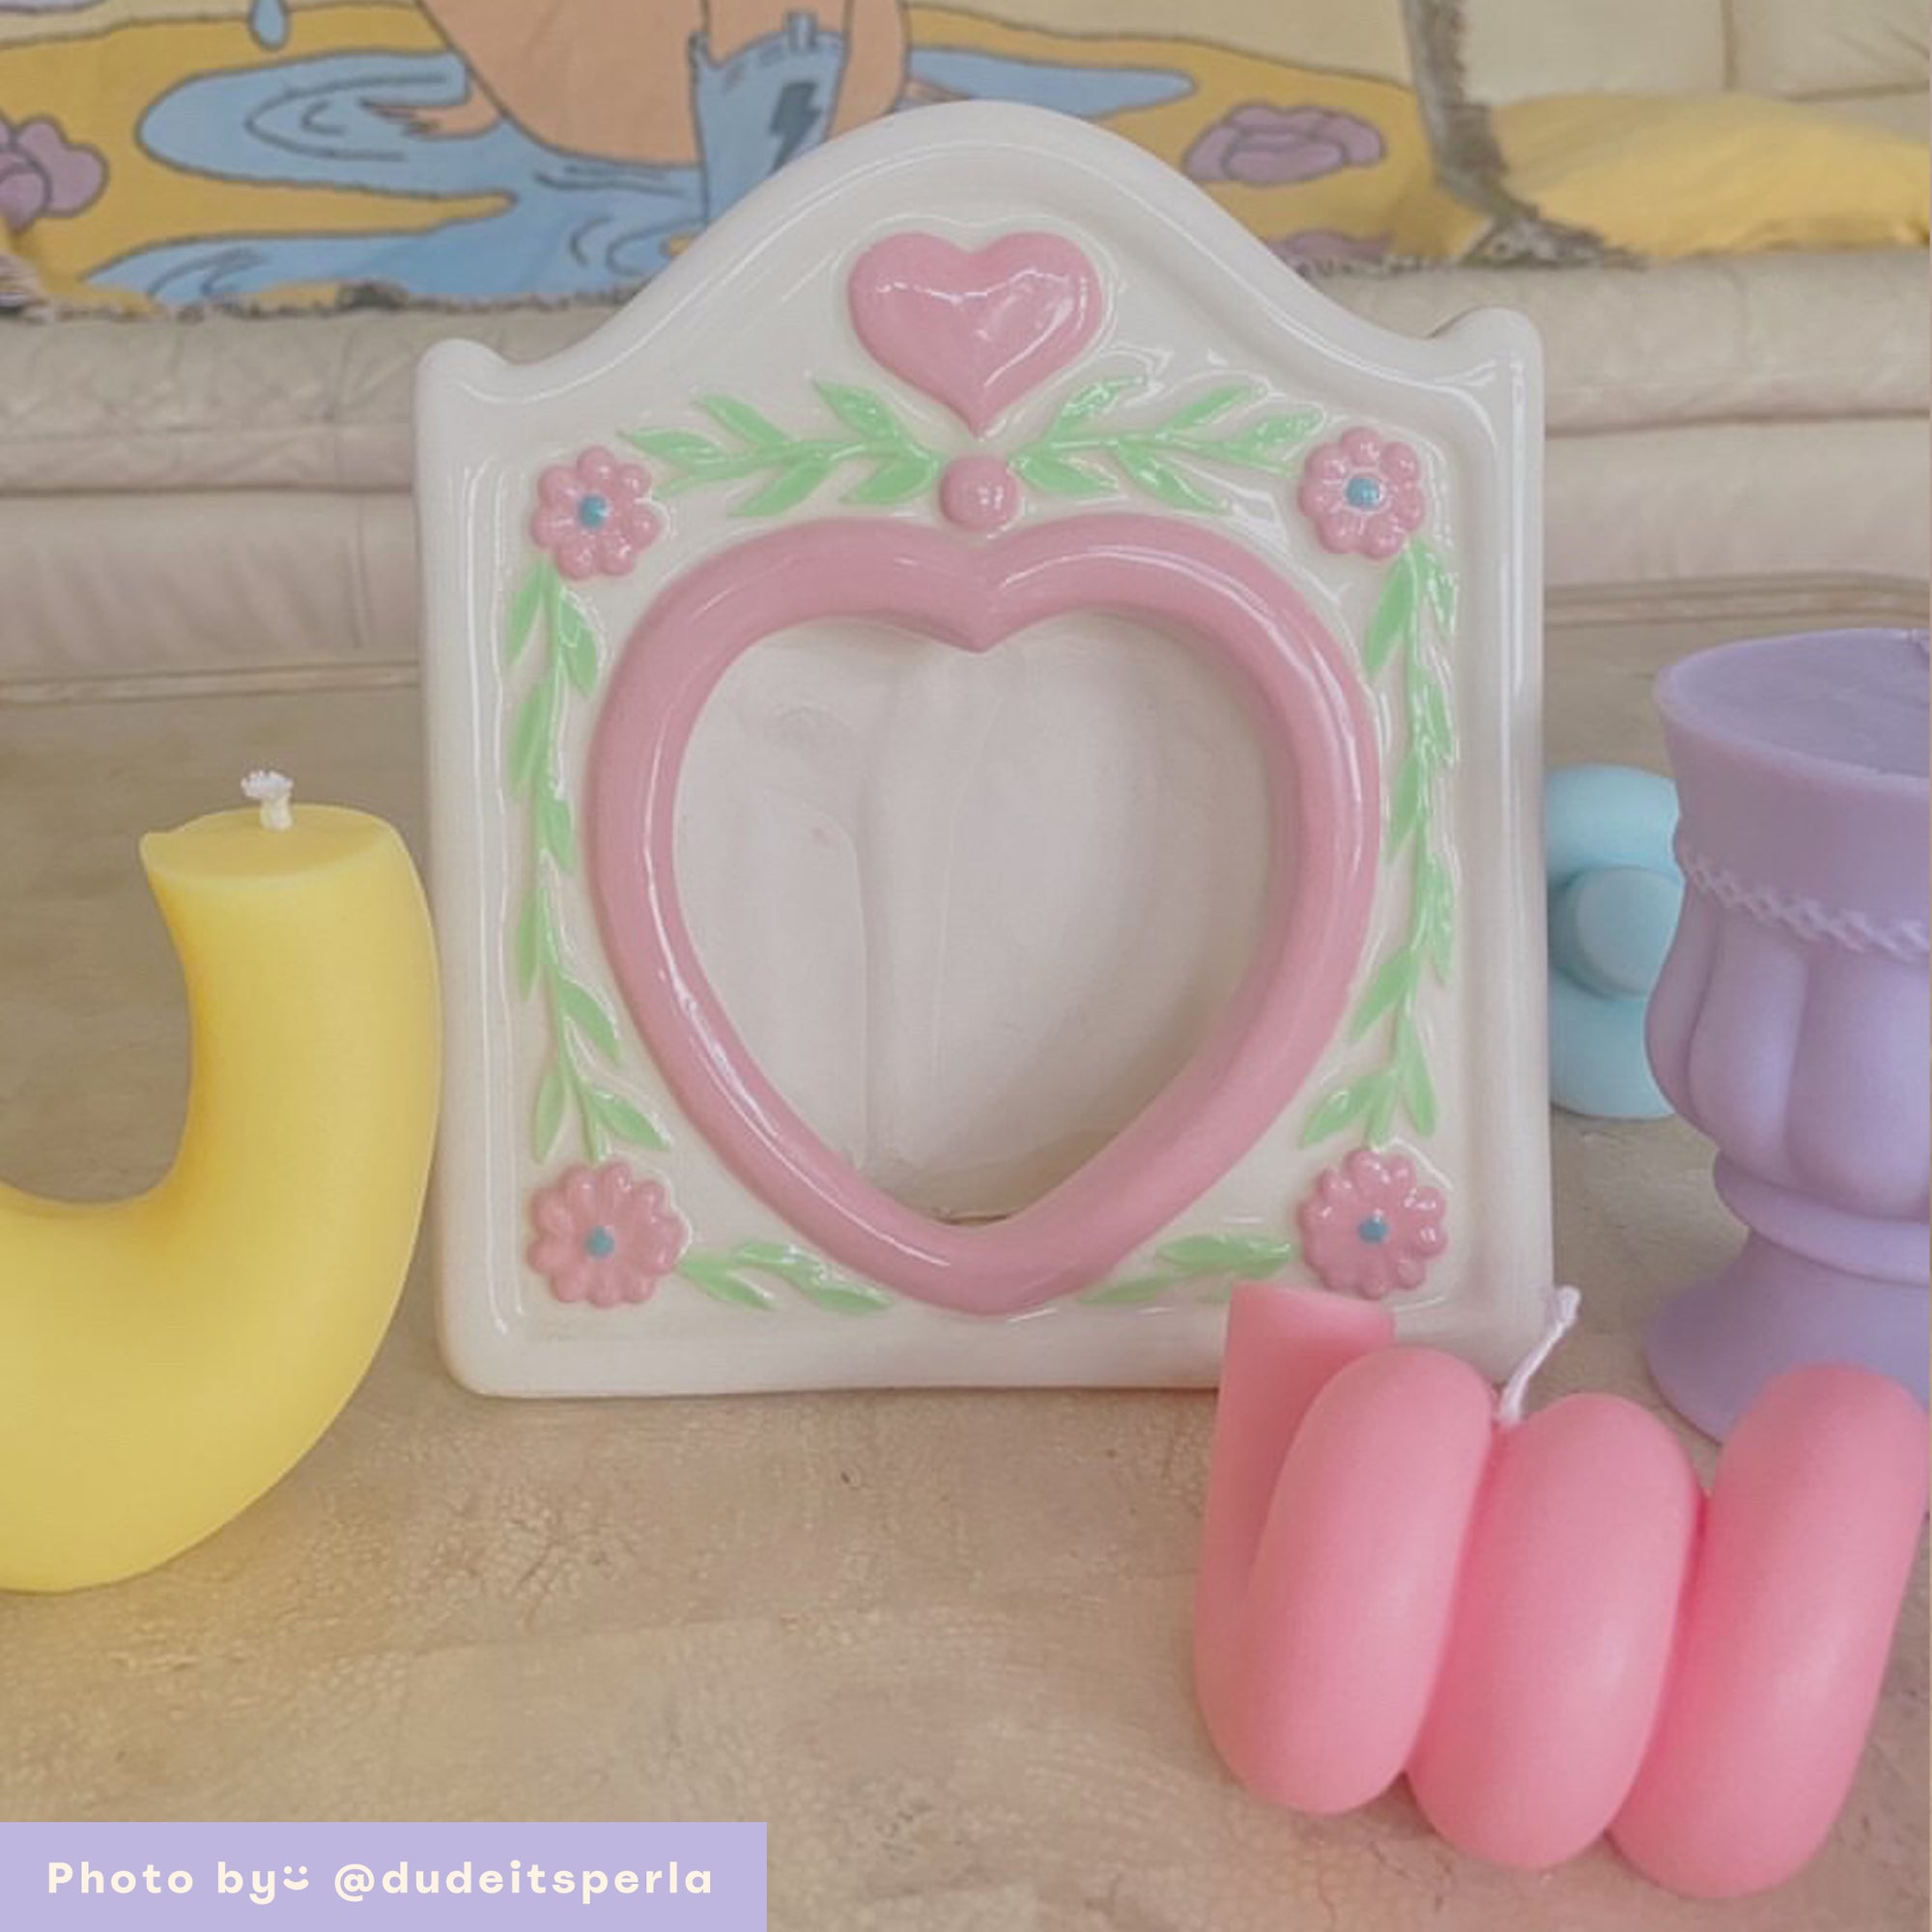 Coil Shaped Soy Wax Candle │ Kawaii Candle